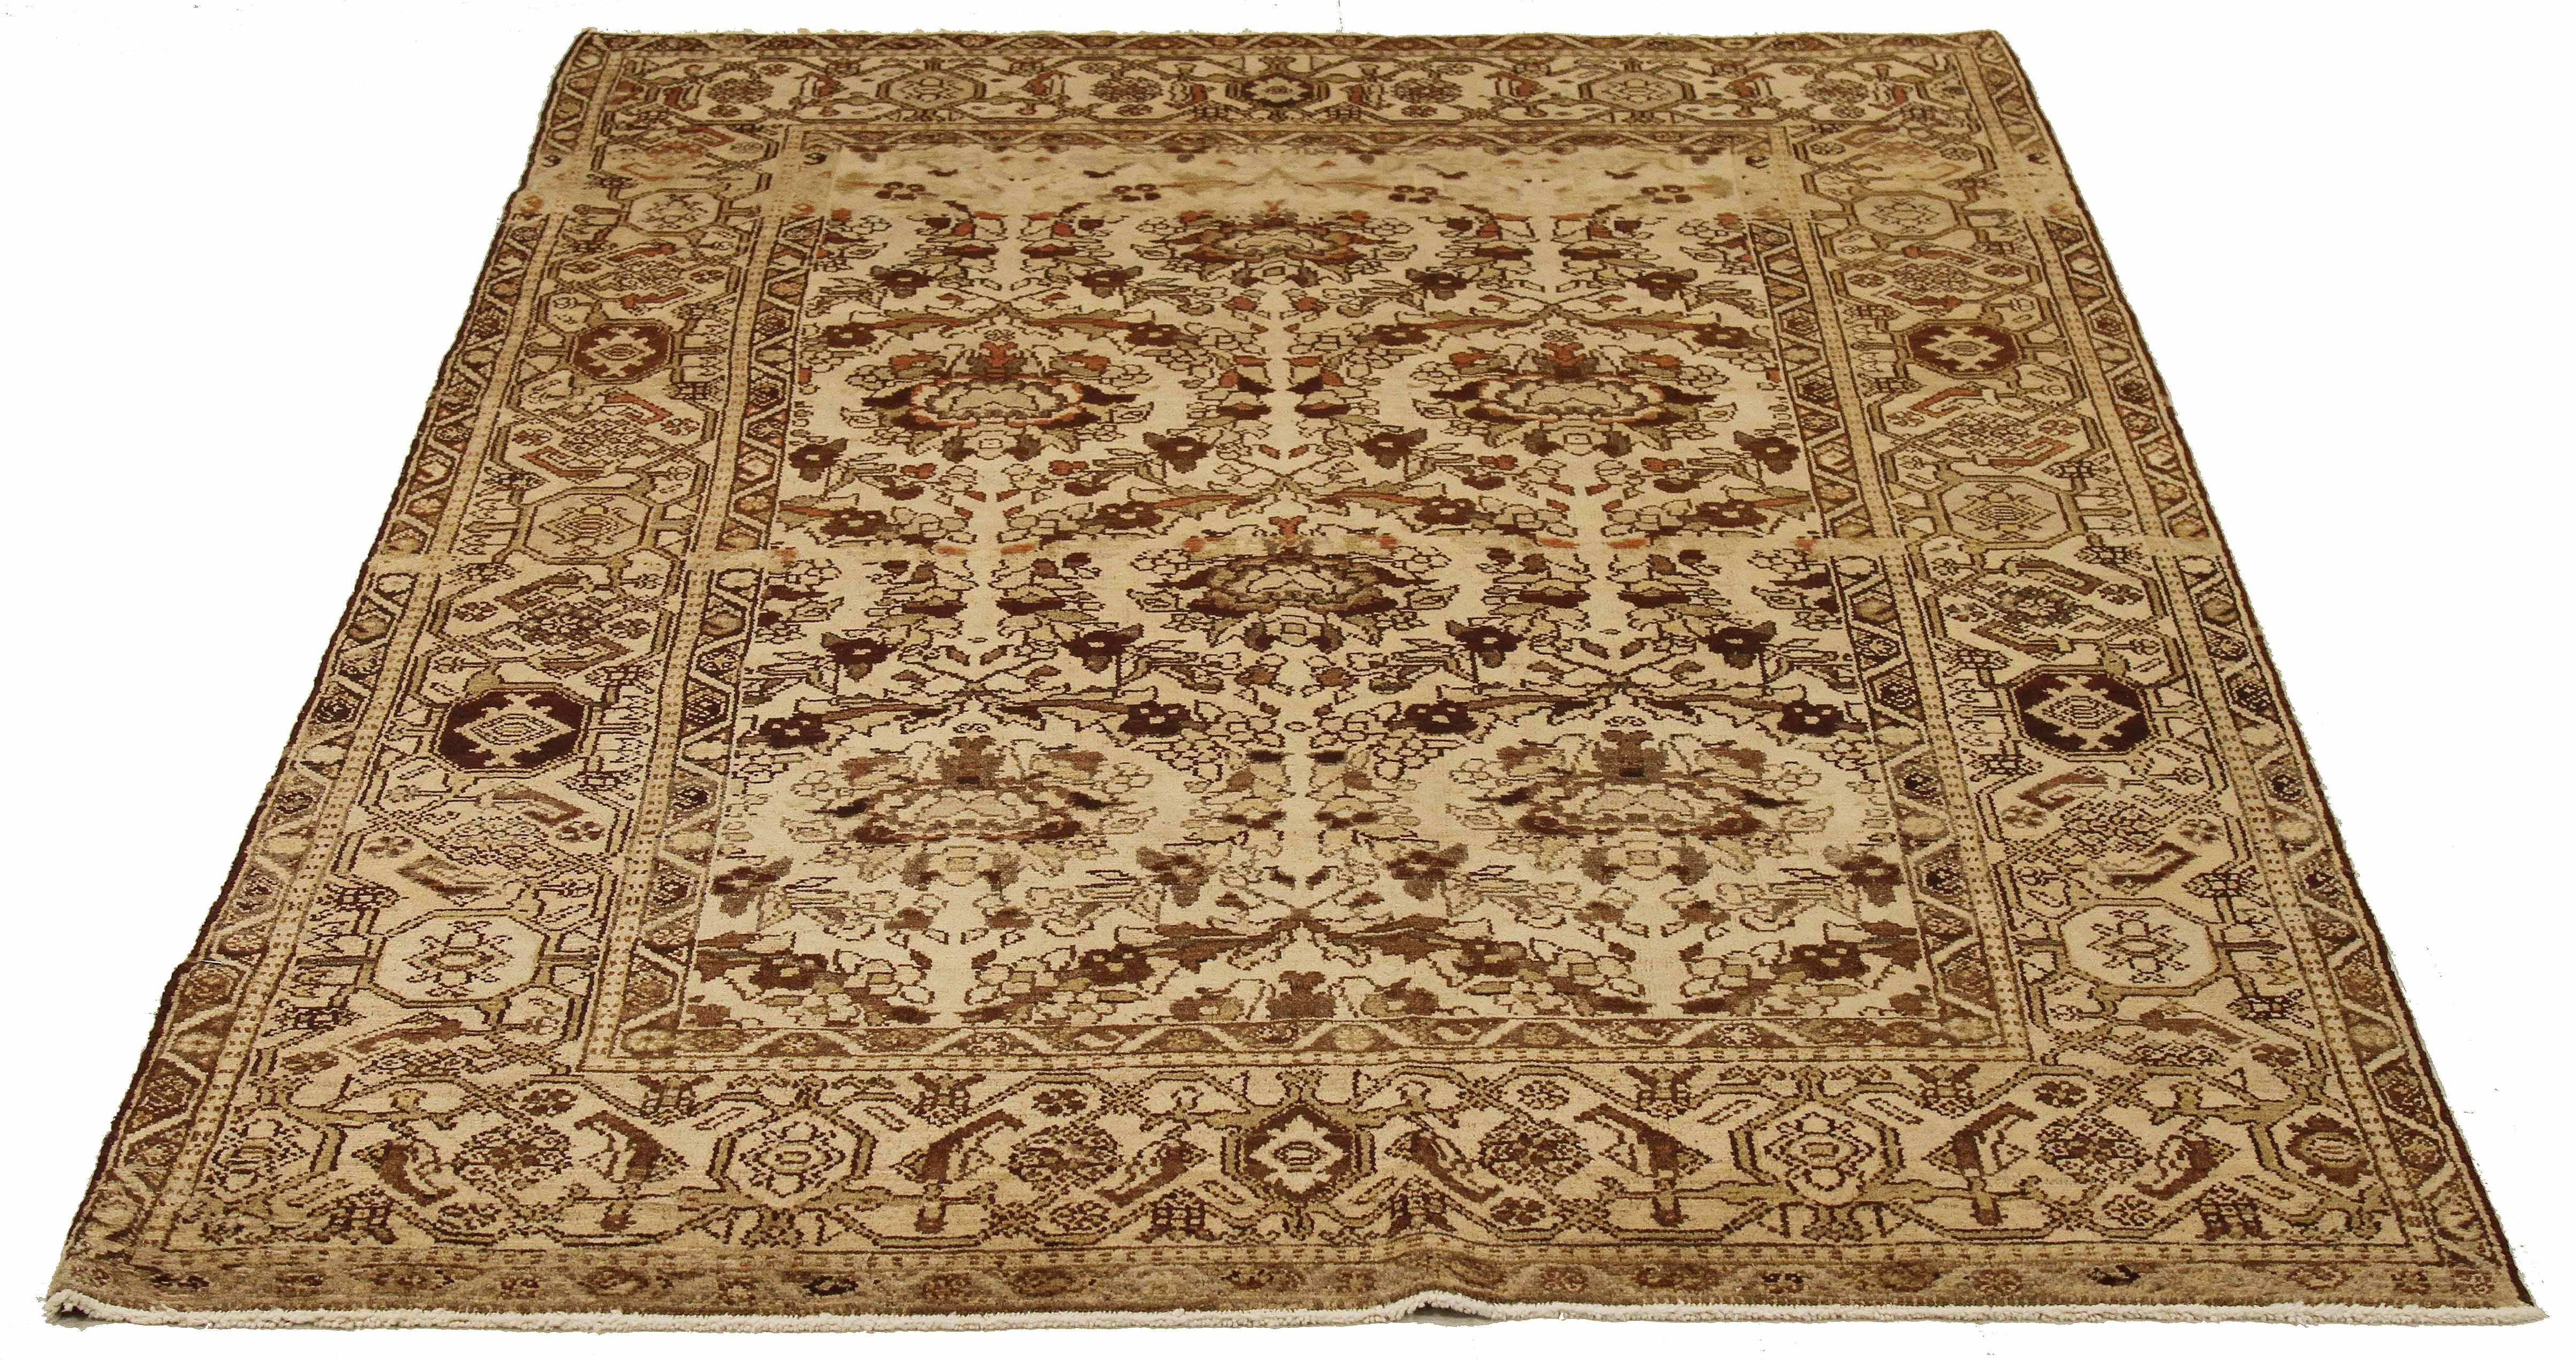 Antique Persian runner rug handwoven from the finest sheep’s wool and colored with all-natural vegetable dyes that are safe for humans and pets. It’s a traditional Malayer design featuring brown and black botanical details over a beige field. It’s a